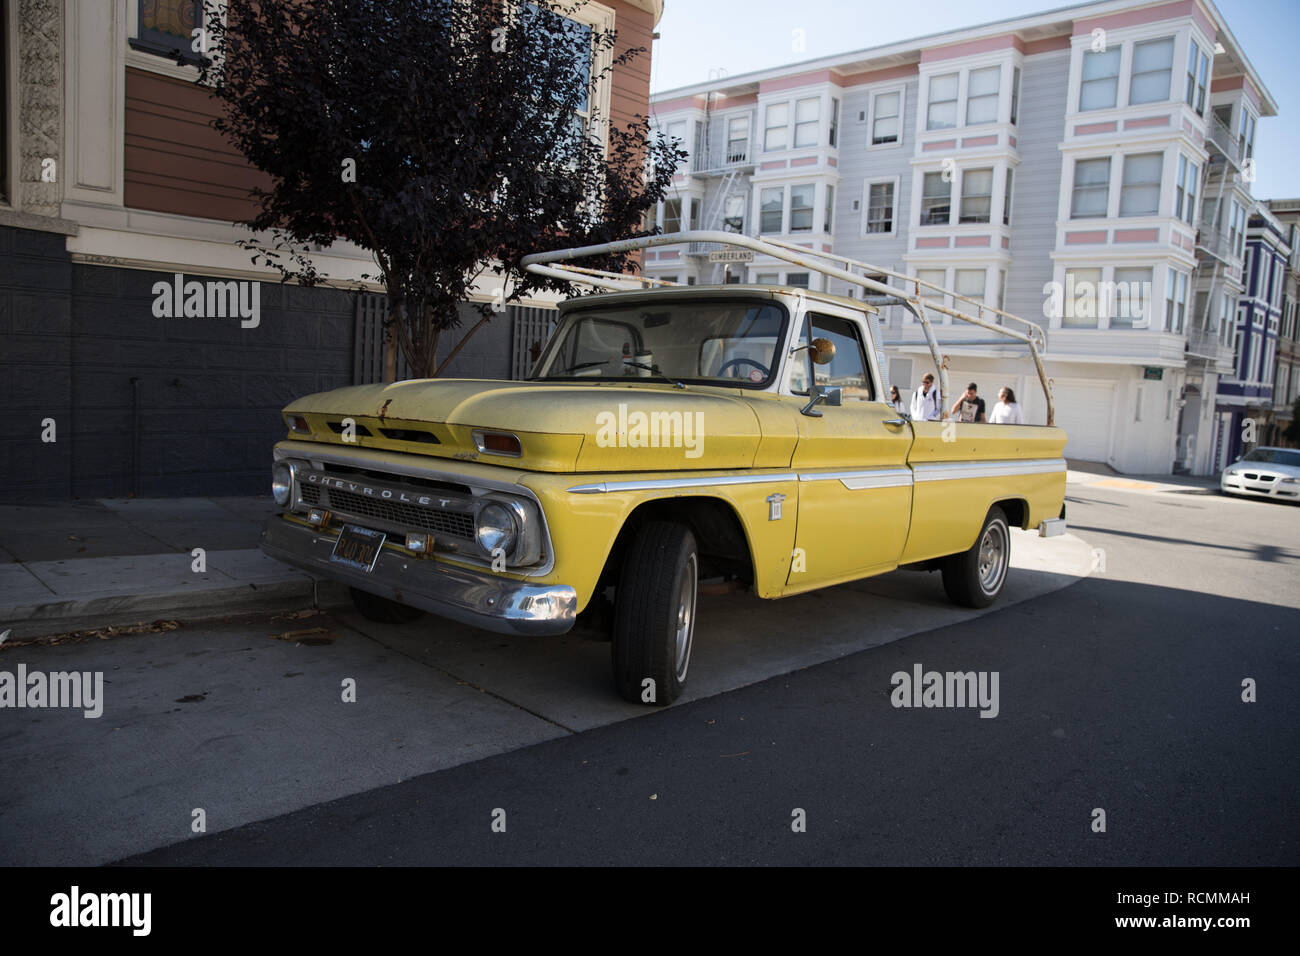 Vintage Chevrolet Pickup Truck in San Francisco Yellow Stock Photo